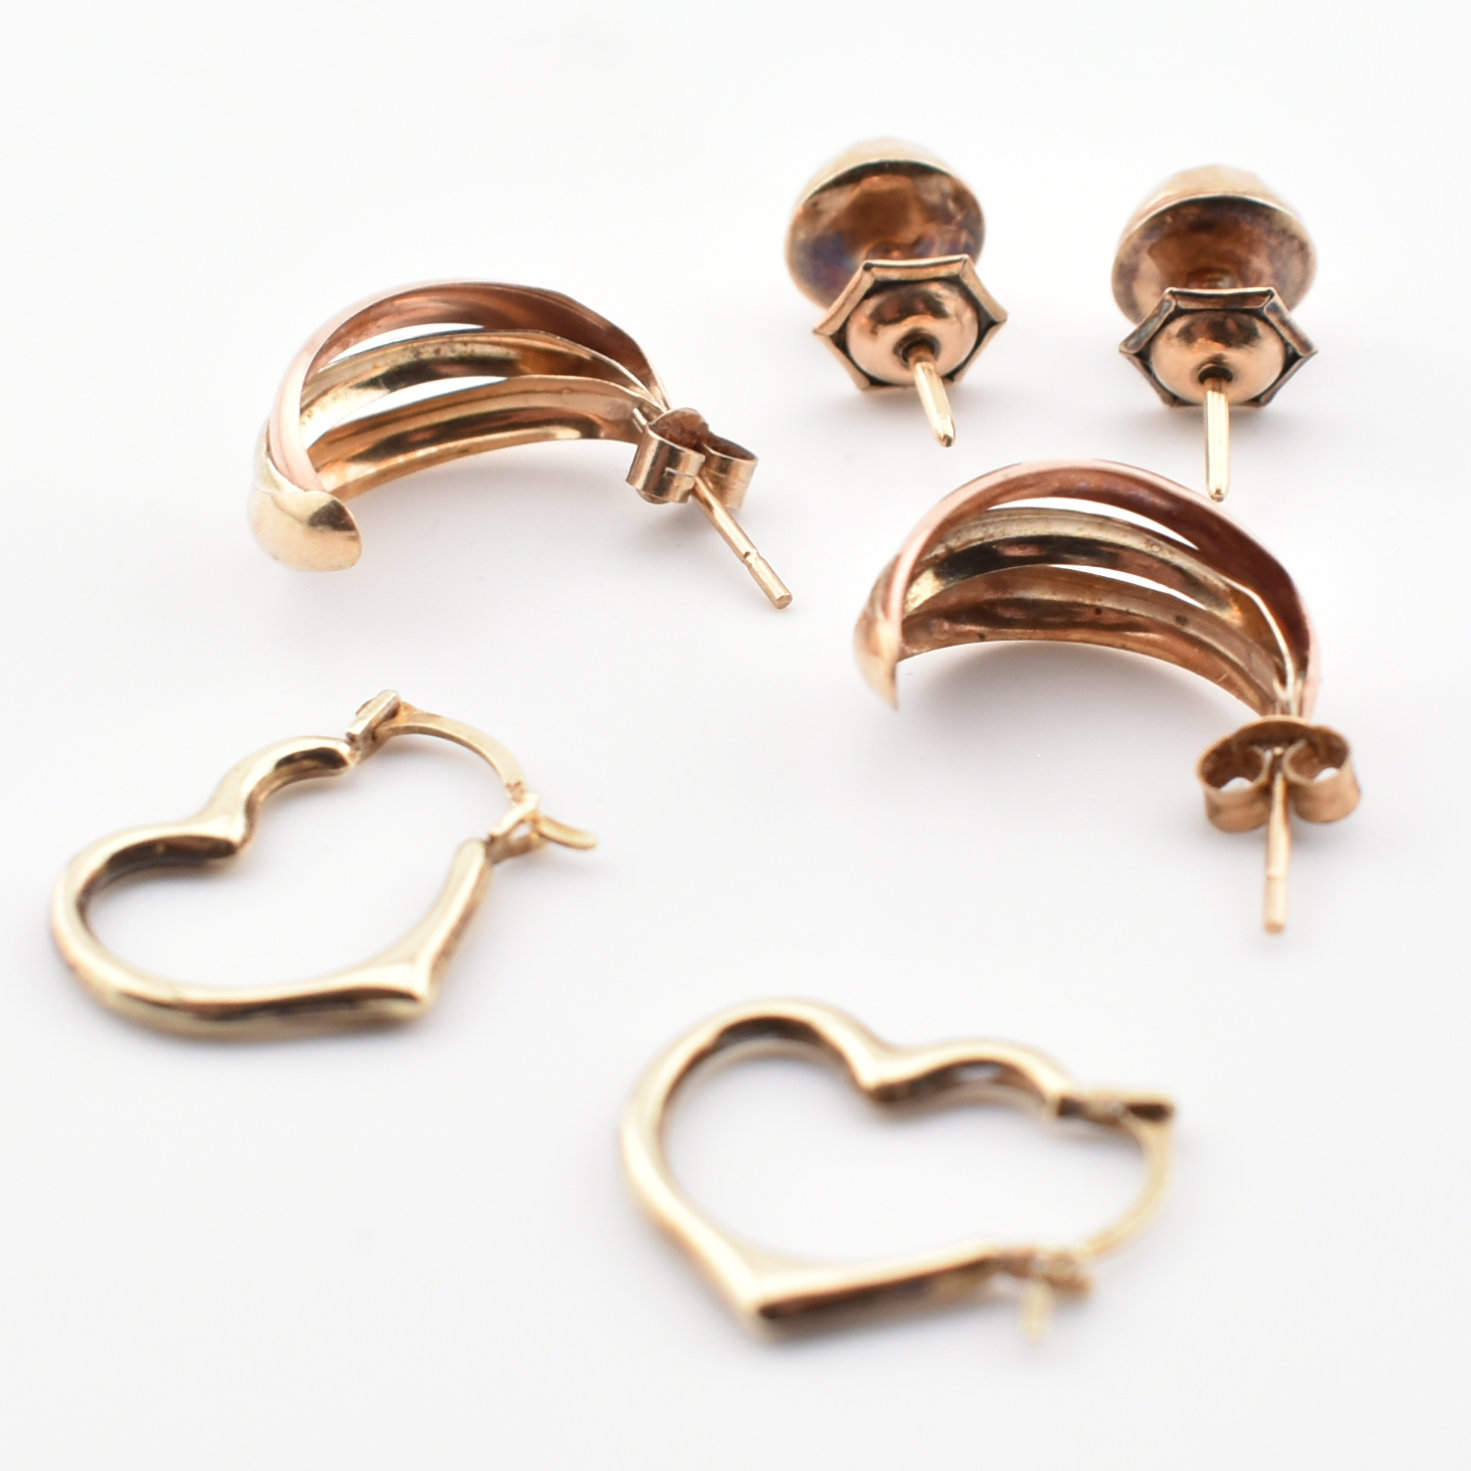 THREE PAIRS OF 9CT GOLD EARRINGS - Image 4 of 4